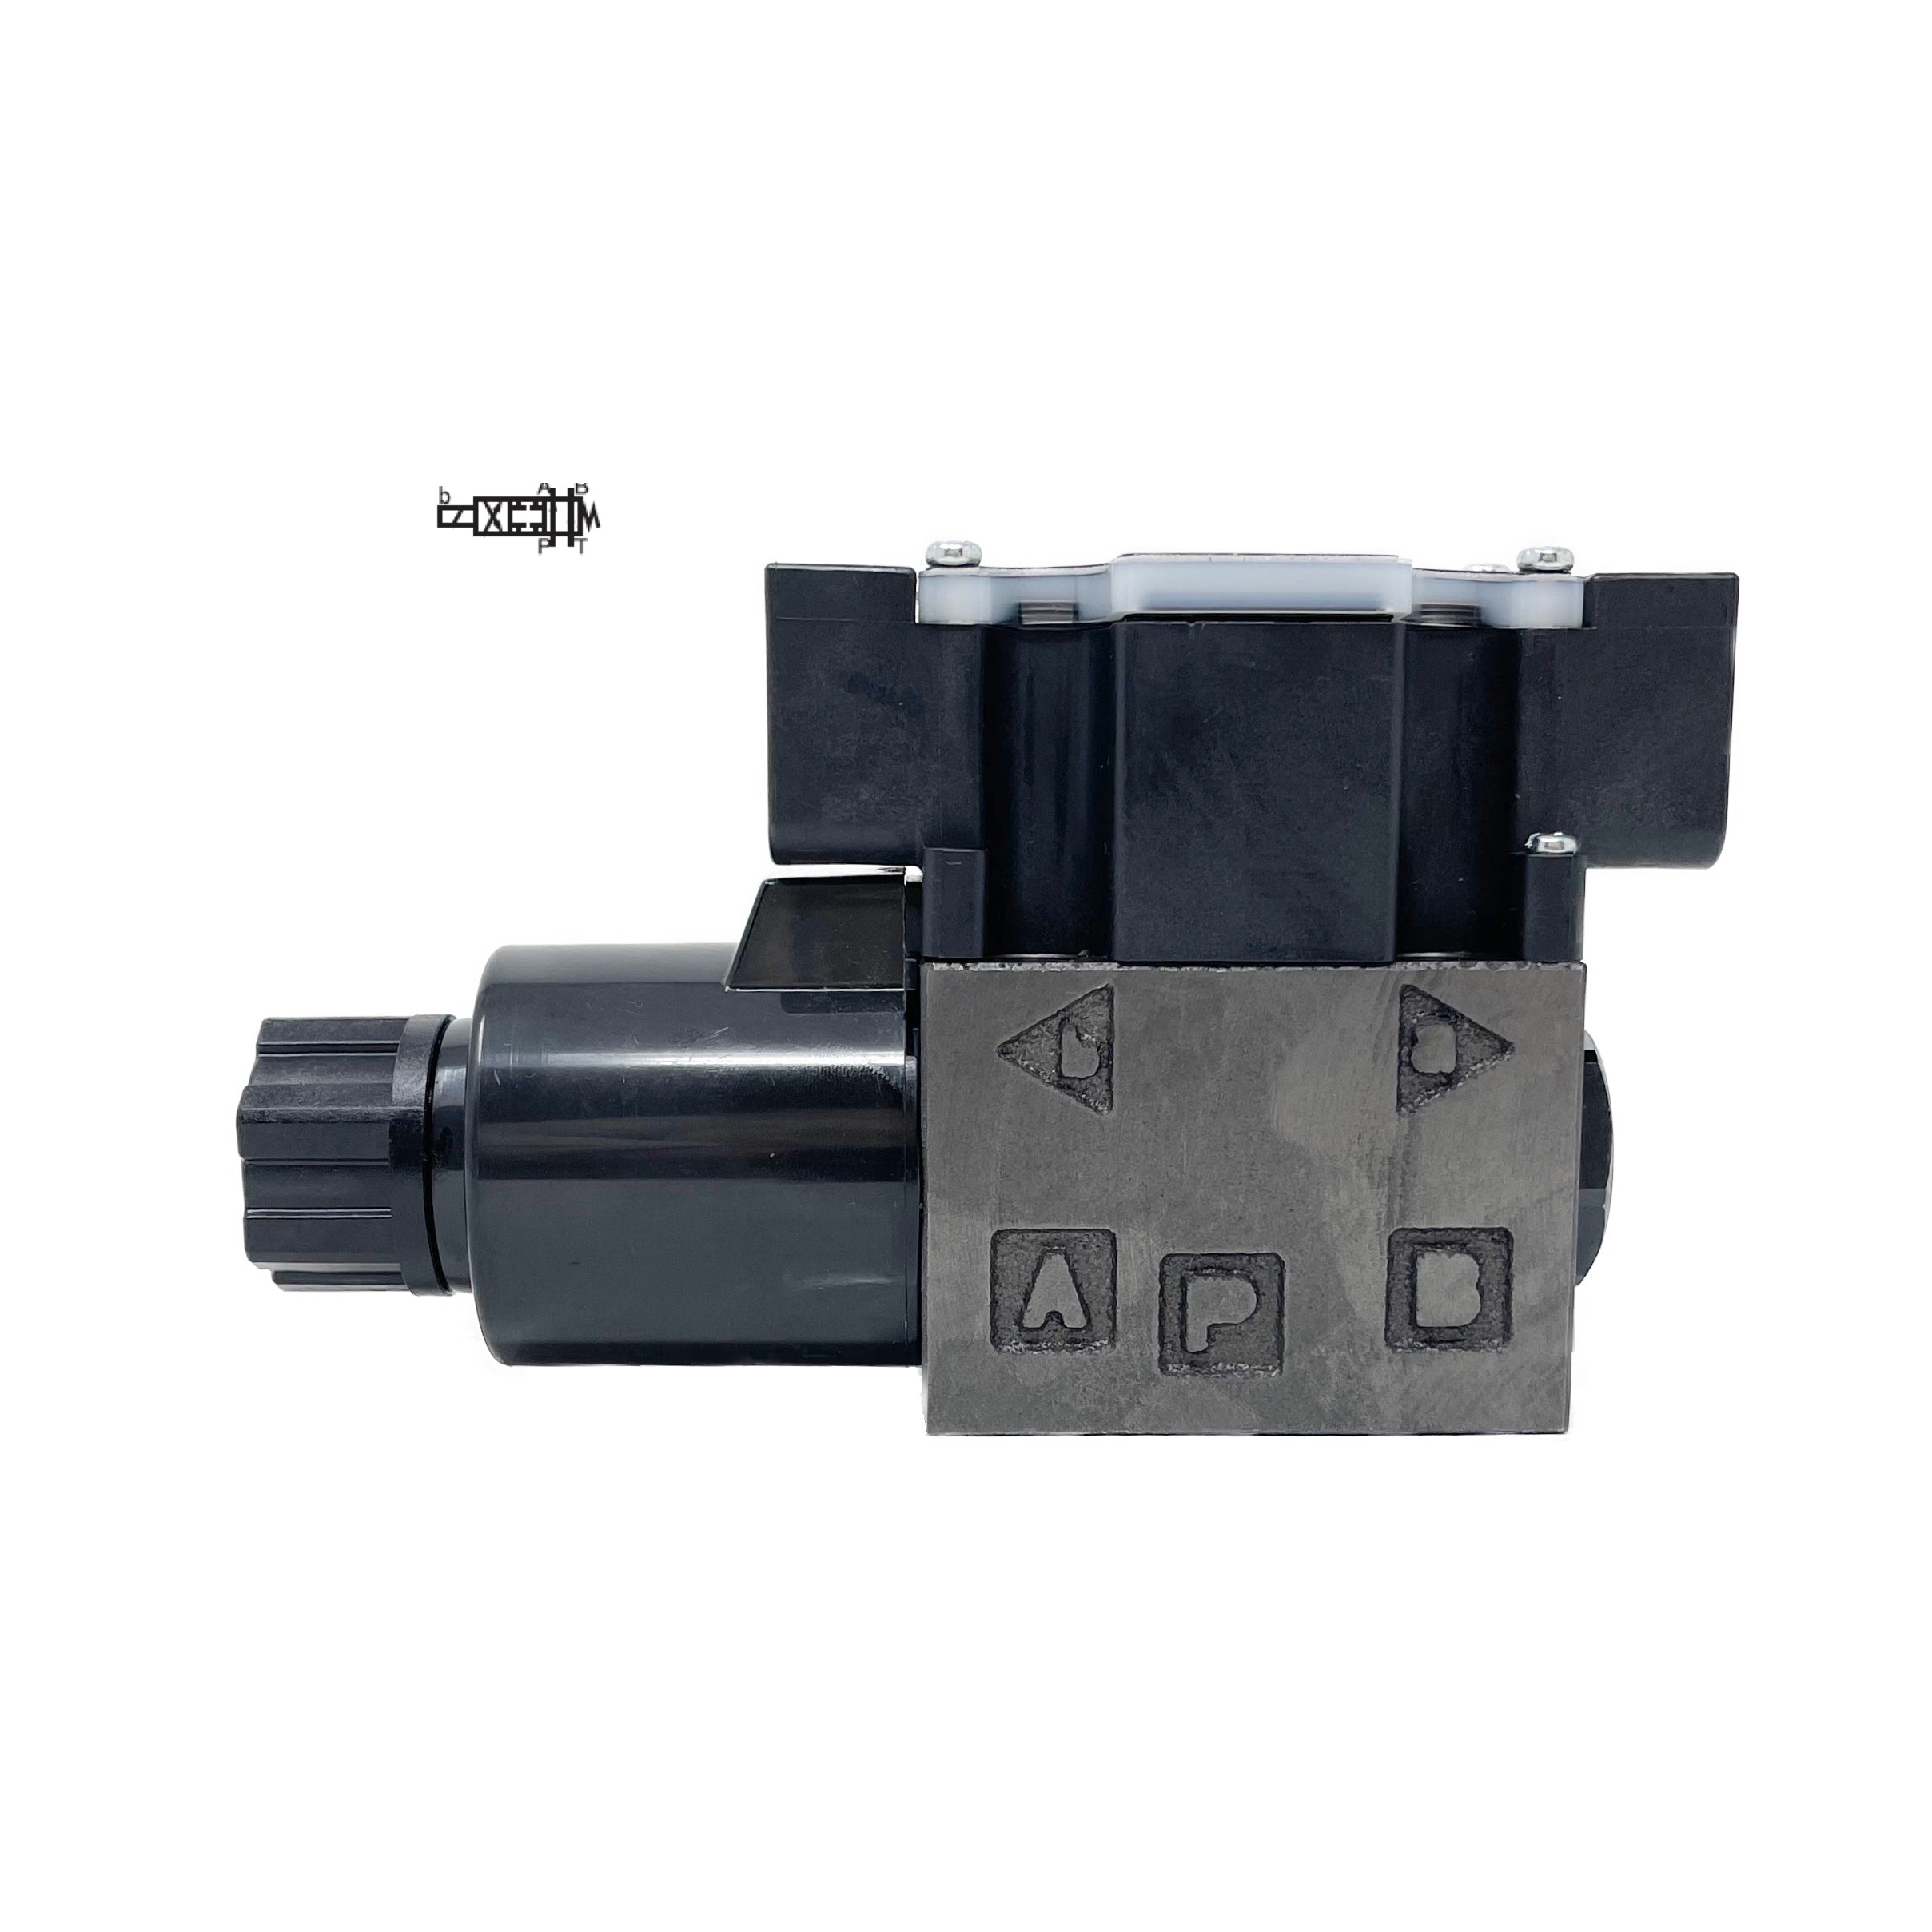 SS-G01-A3X-R-C1-31 : Nachi Solenoid Valve, 3P4W, D03 (NG6), 21GPM, 5075psi,  P to A, B to T in Neutral, 100 VAC, Wiring Box with Lights